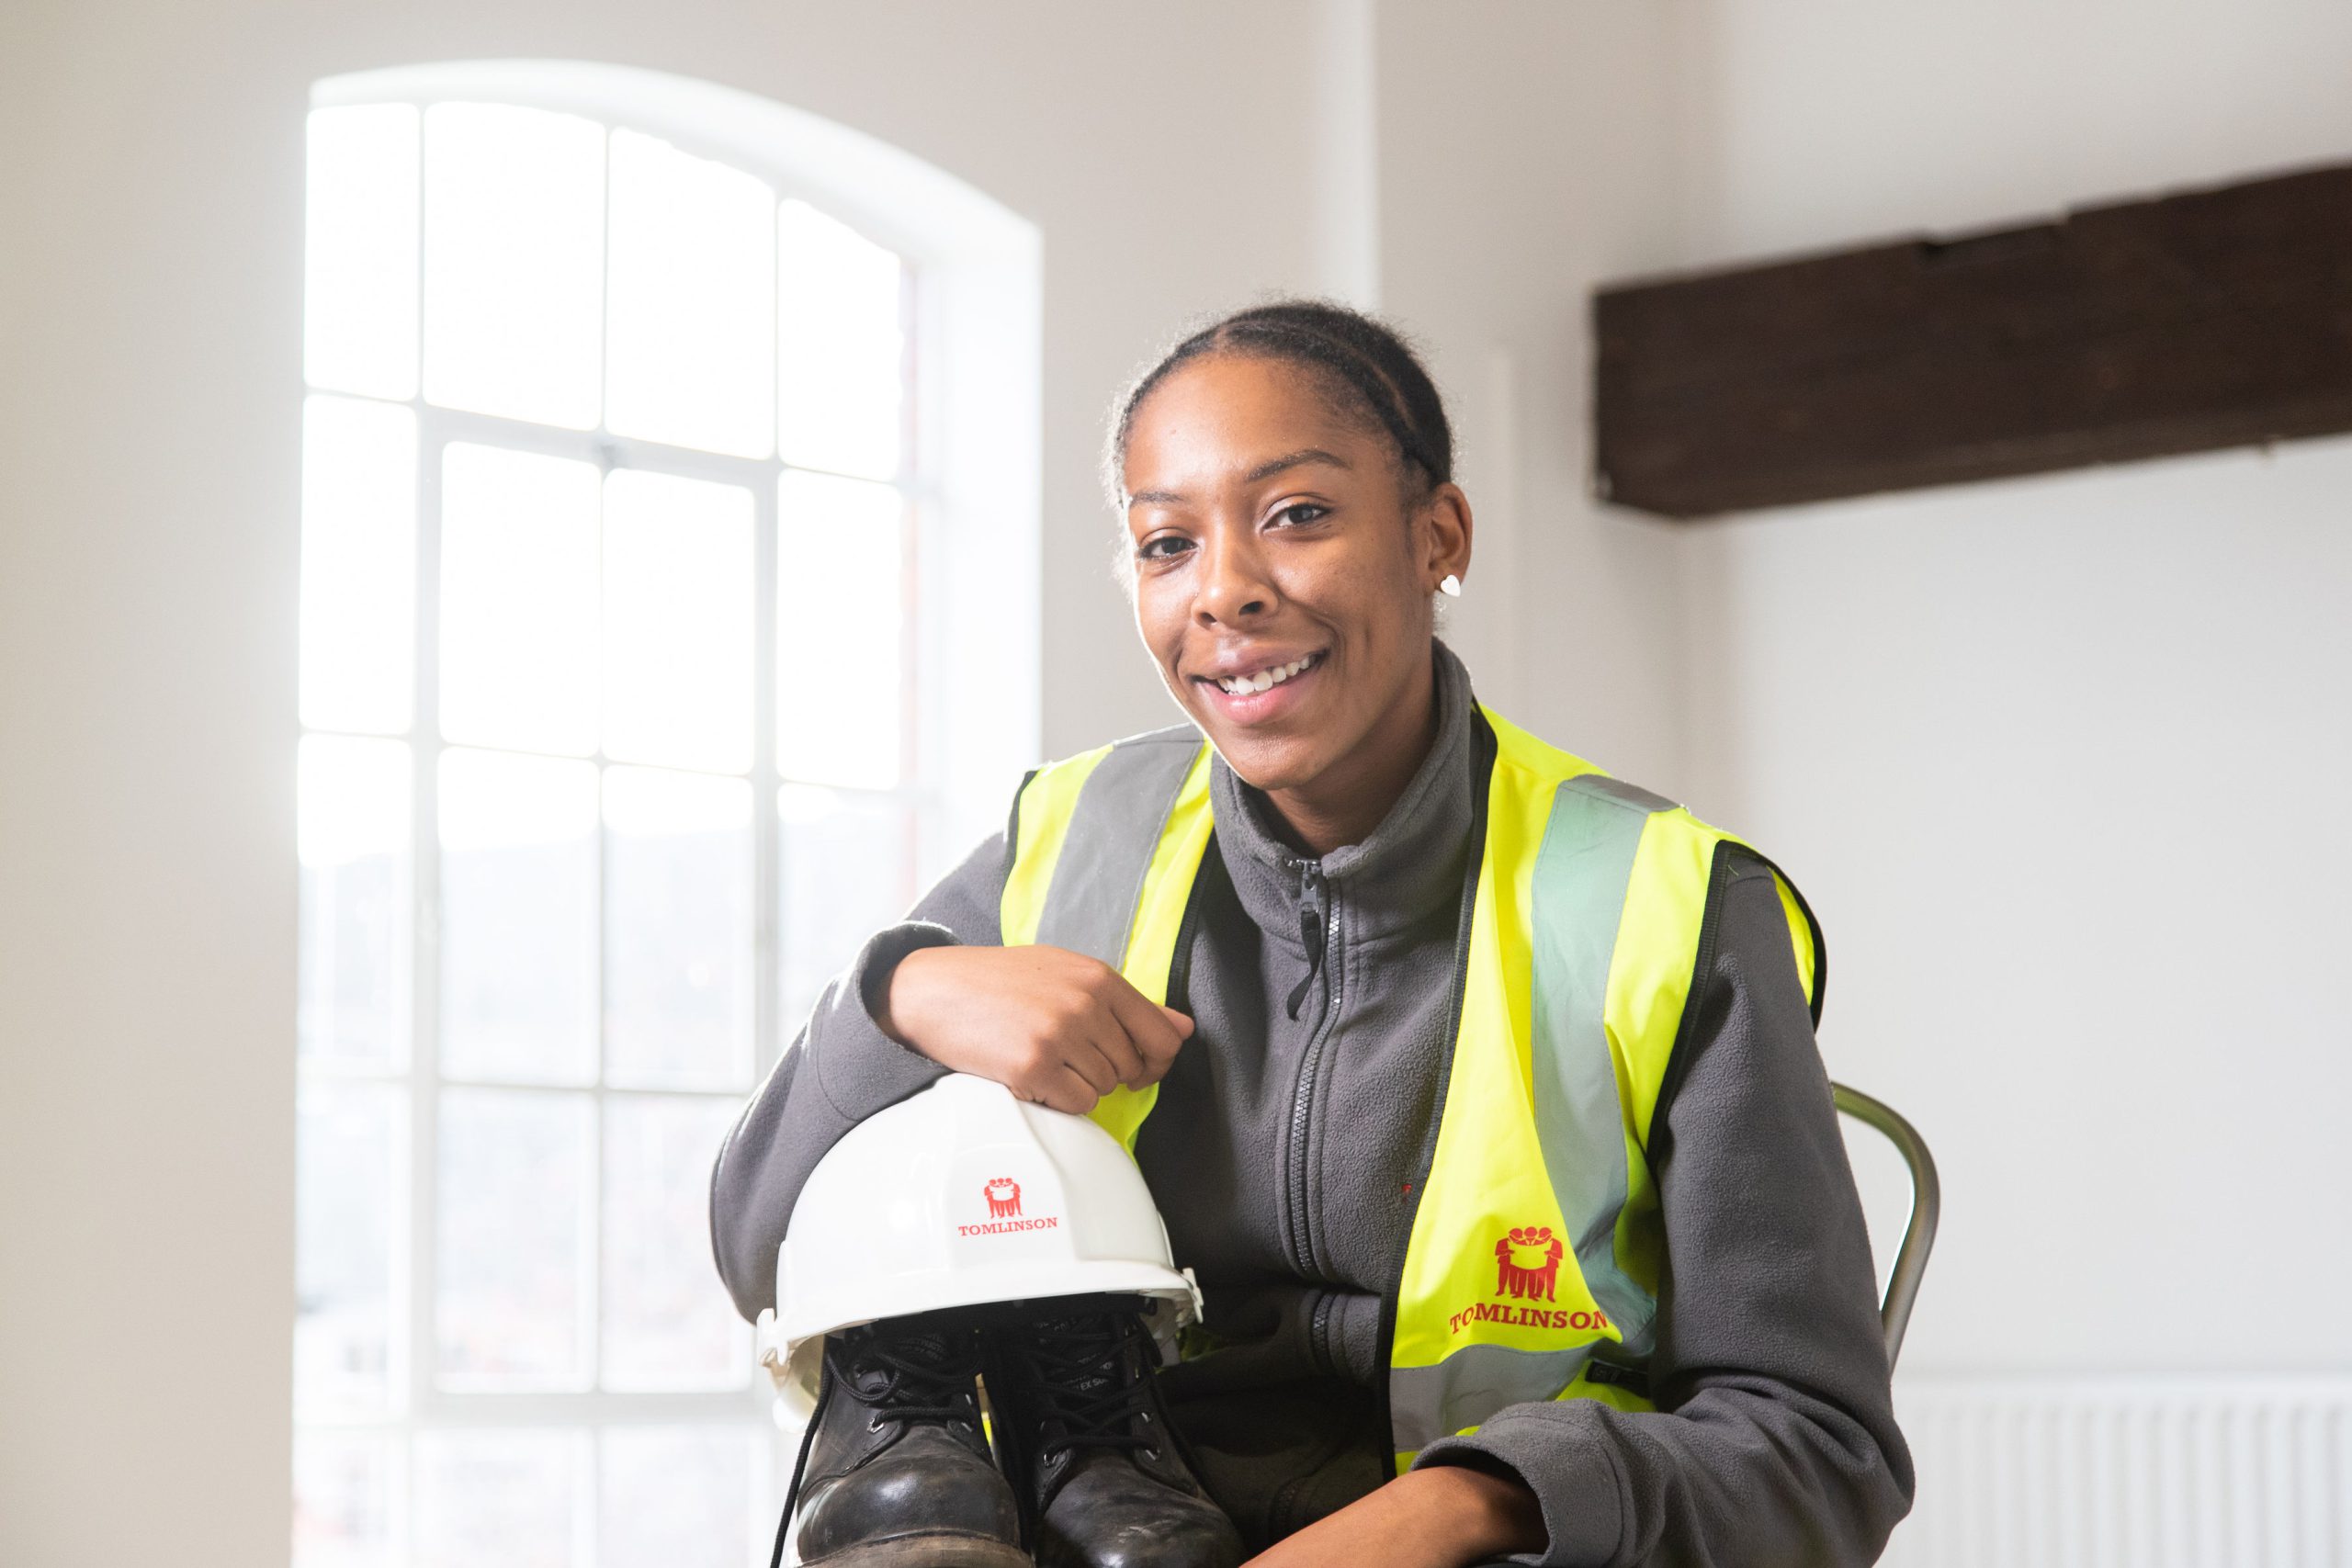 Tiarna Powell wearing a hi-vis vest and holding a hard hat and steel toe-capped boots